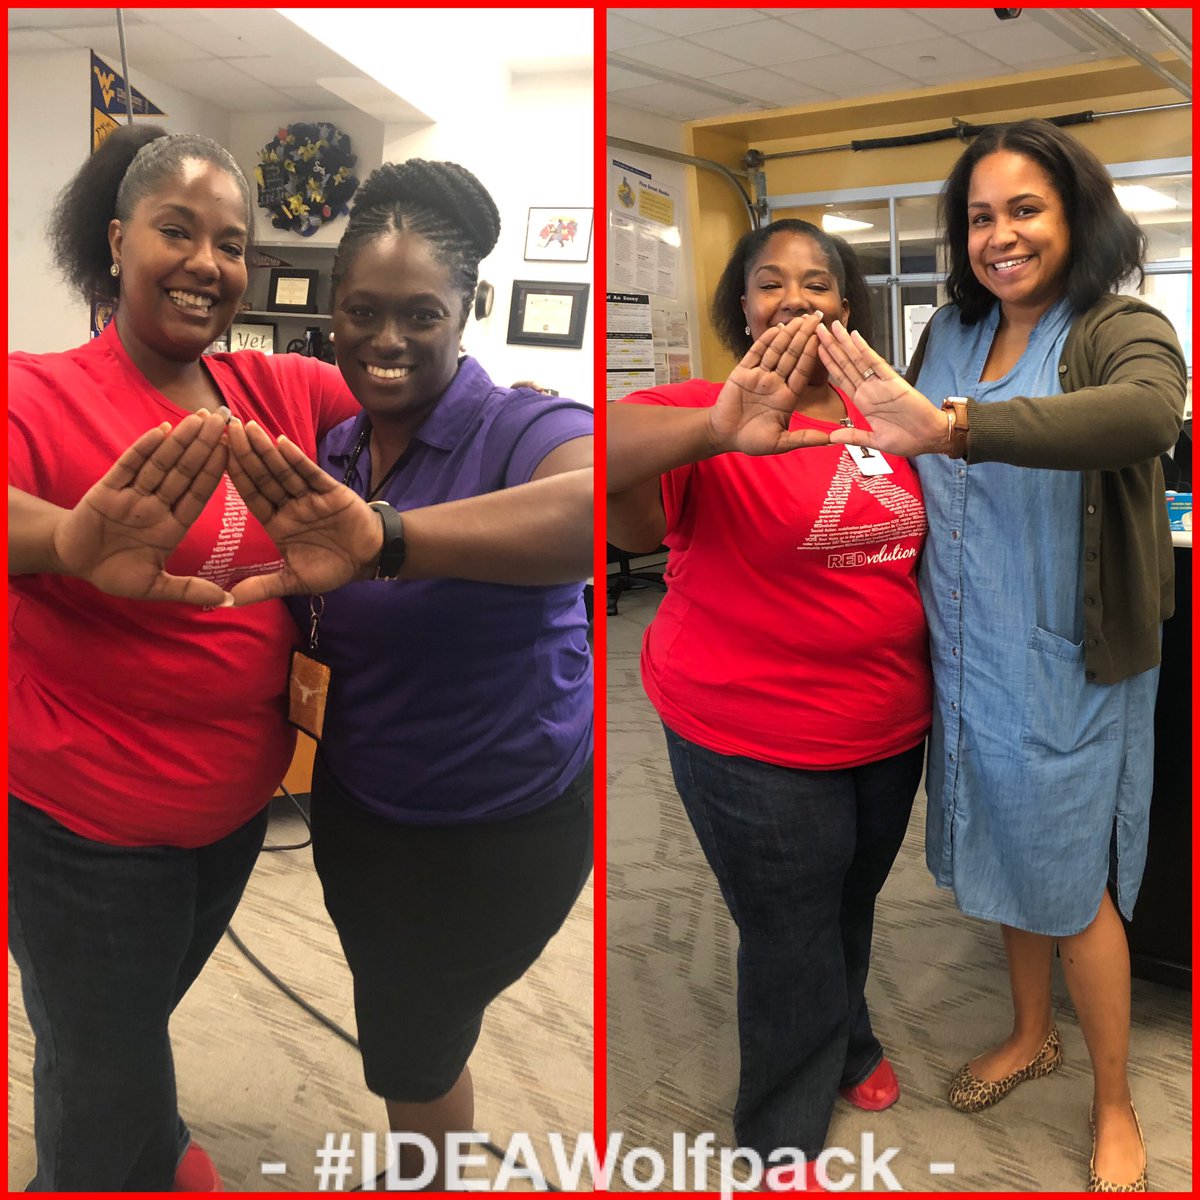 The campus was so #REDy today and I was here for IT!!!! #OooOop #DeltasInEducation🔺😁🤗📚🔺 @AVID4College @IDEA_at_Fannin @PrincipalHicks @VirtualMrs